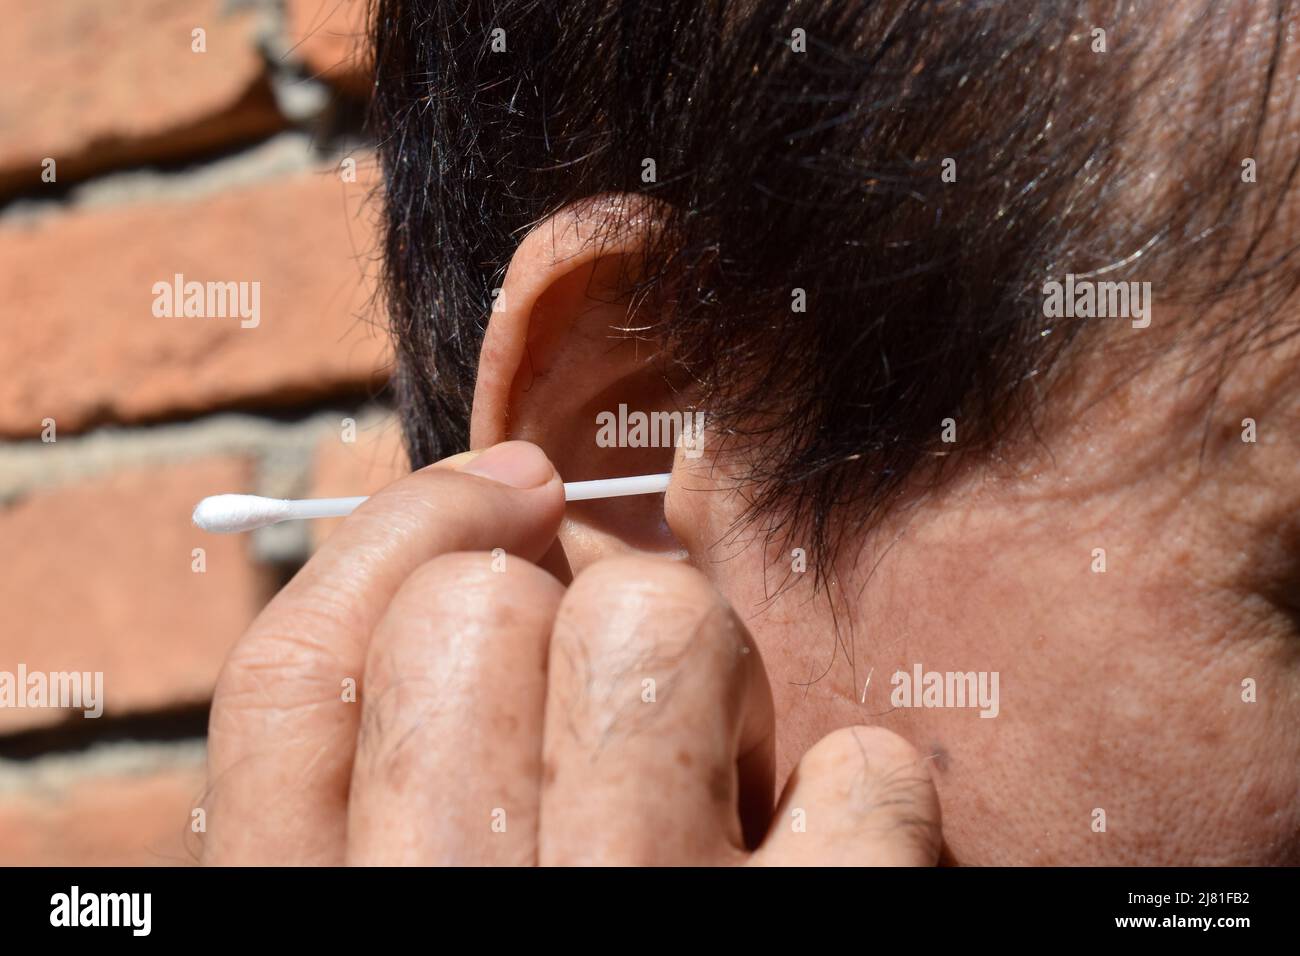 Asian old man cleaning his earwax with cotton earpick. Stock Photo